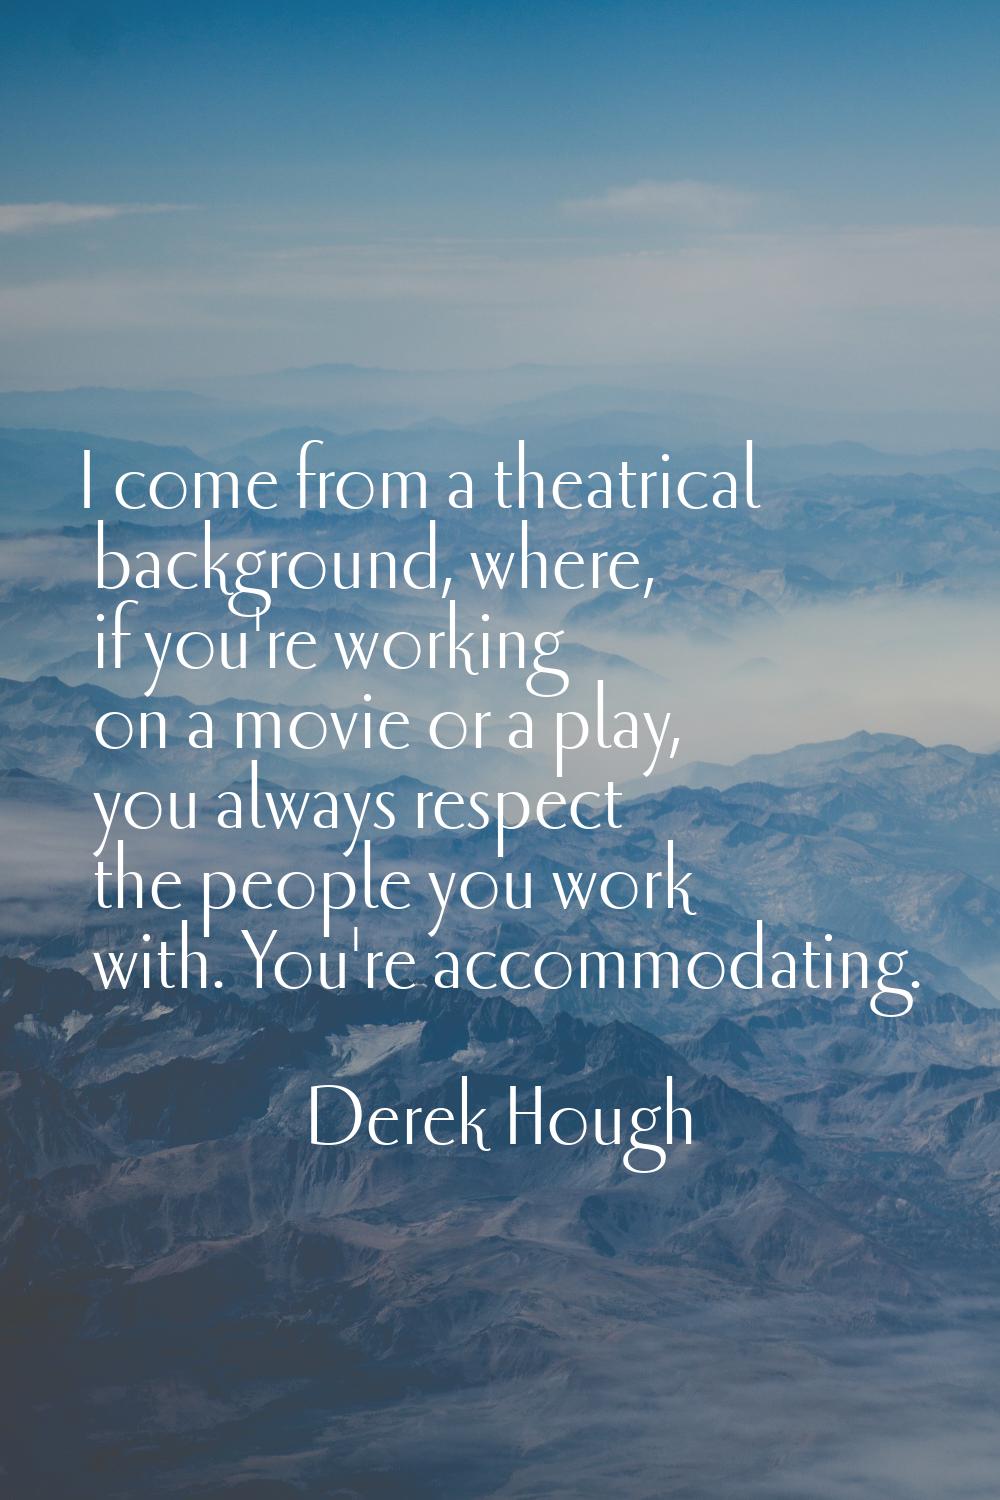 I come from a theatrical background, where, if you're working on a movie or a play, you always resp